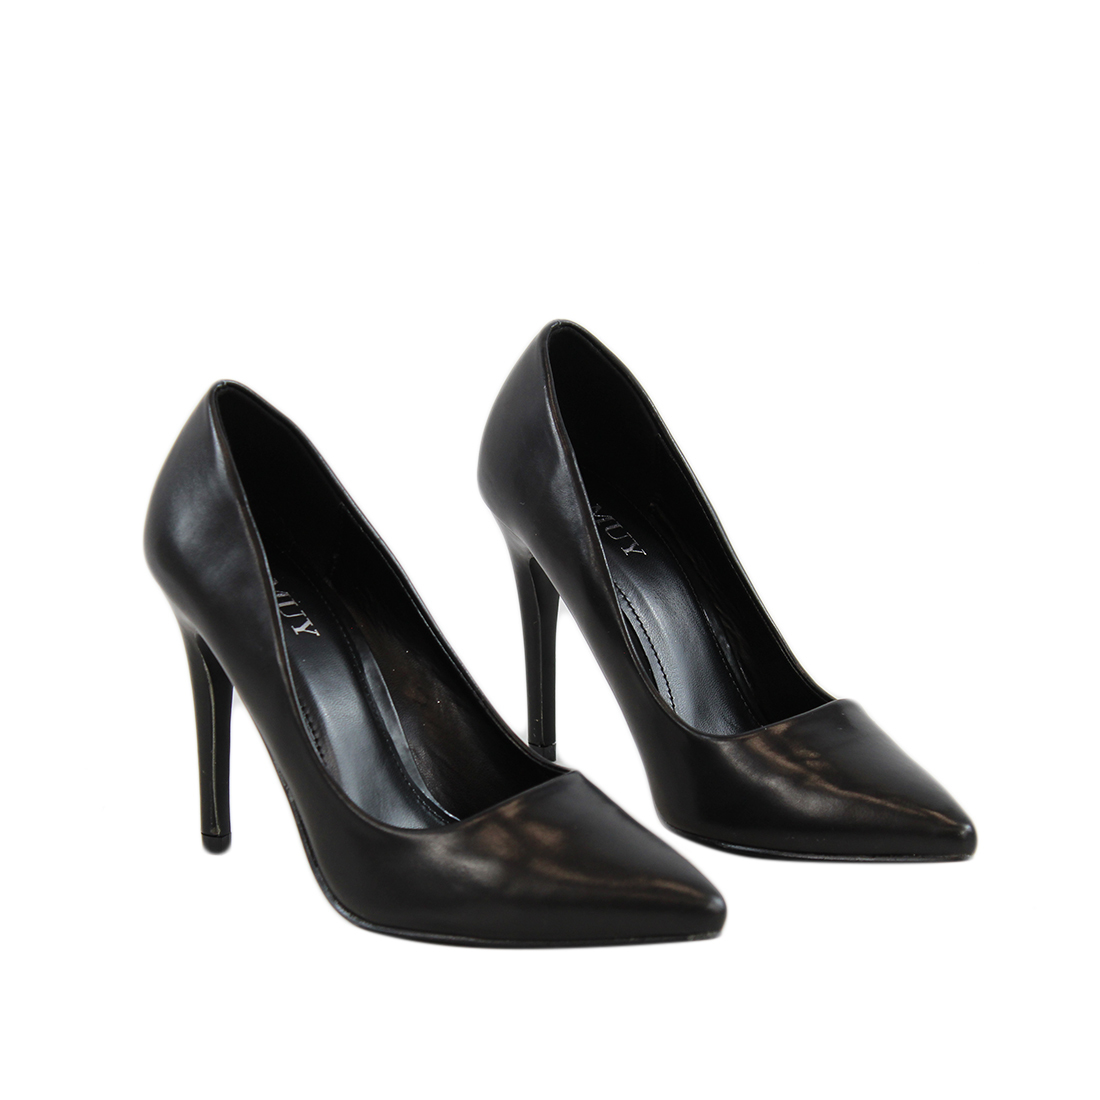 * Alaka Pointed Style with thin heels